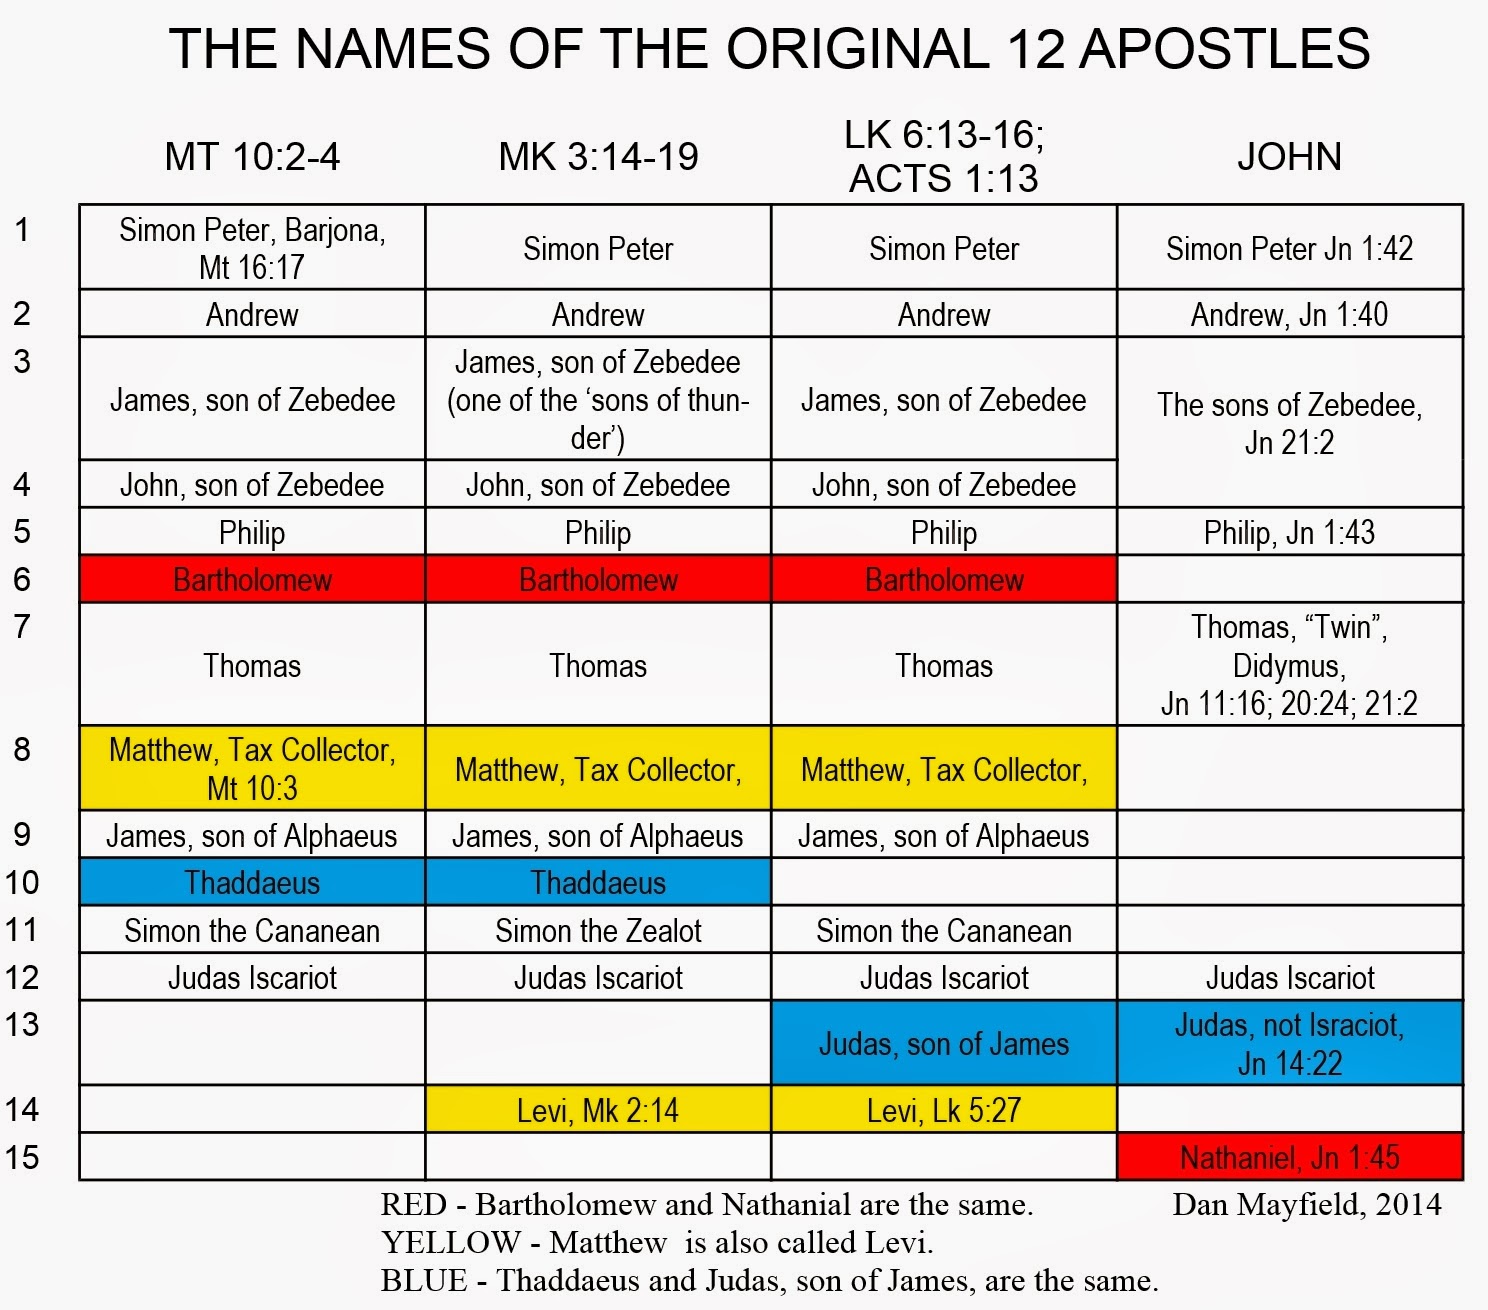 Who were some of the original 12 disciples of Jesus?